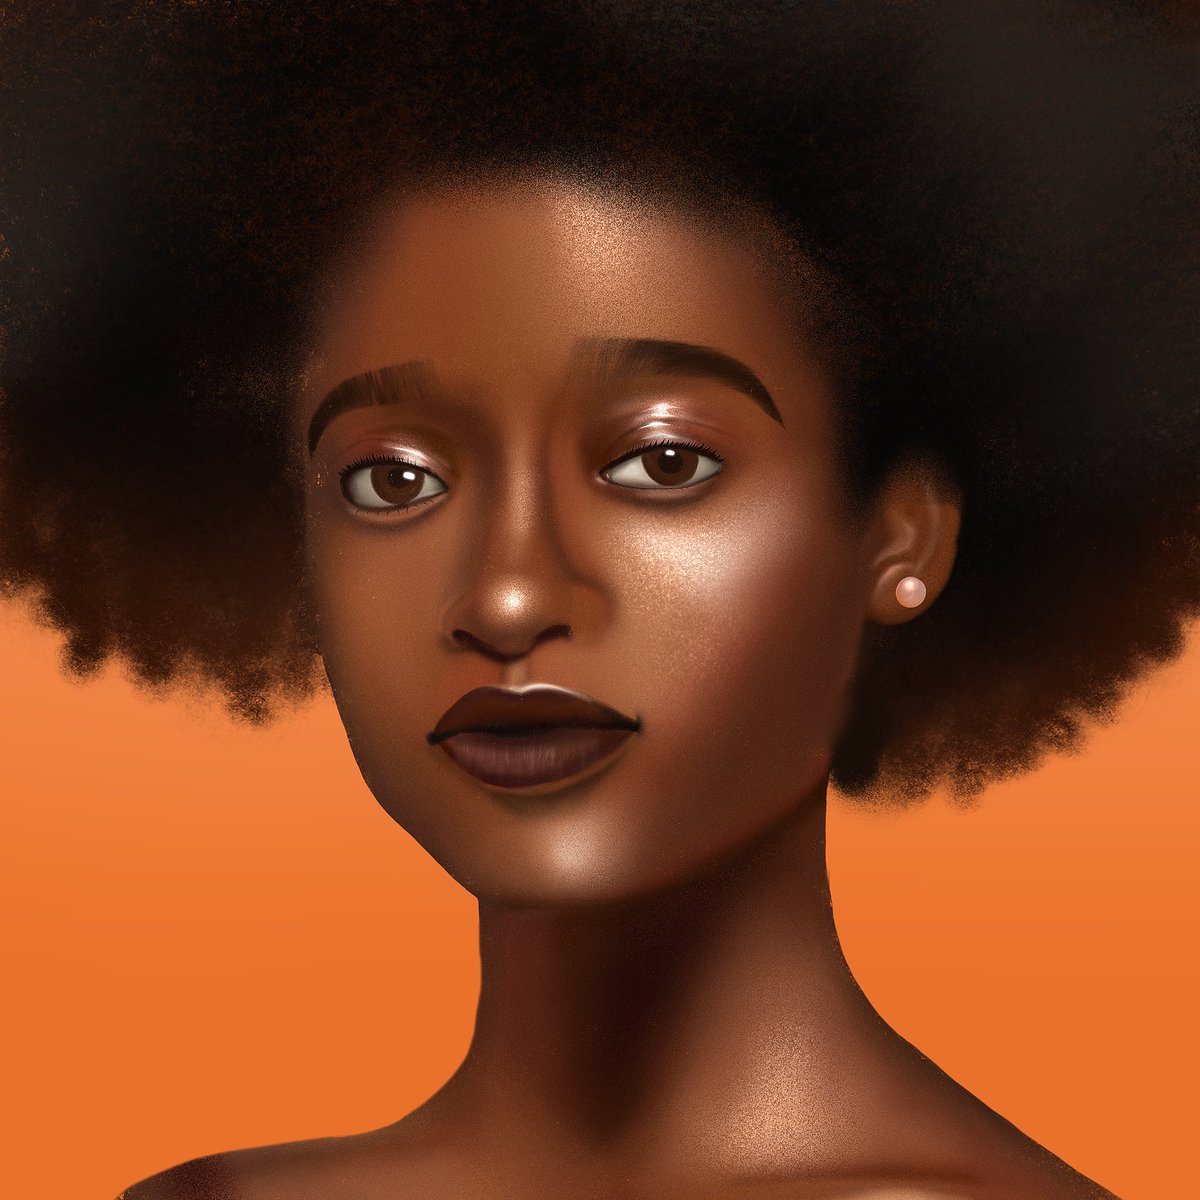 a thread documenting my “realistic” art process so I can actually be methodical with how I go about this (ft my third “realistic” digital painting ever)